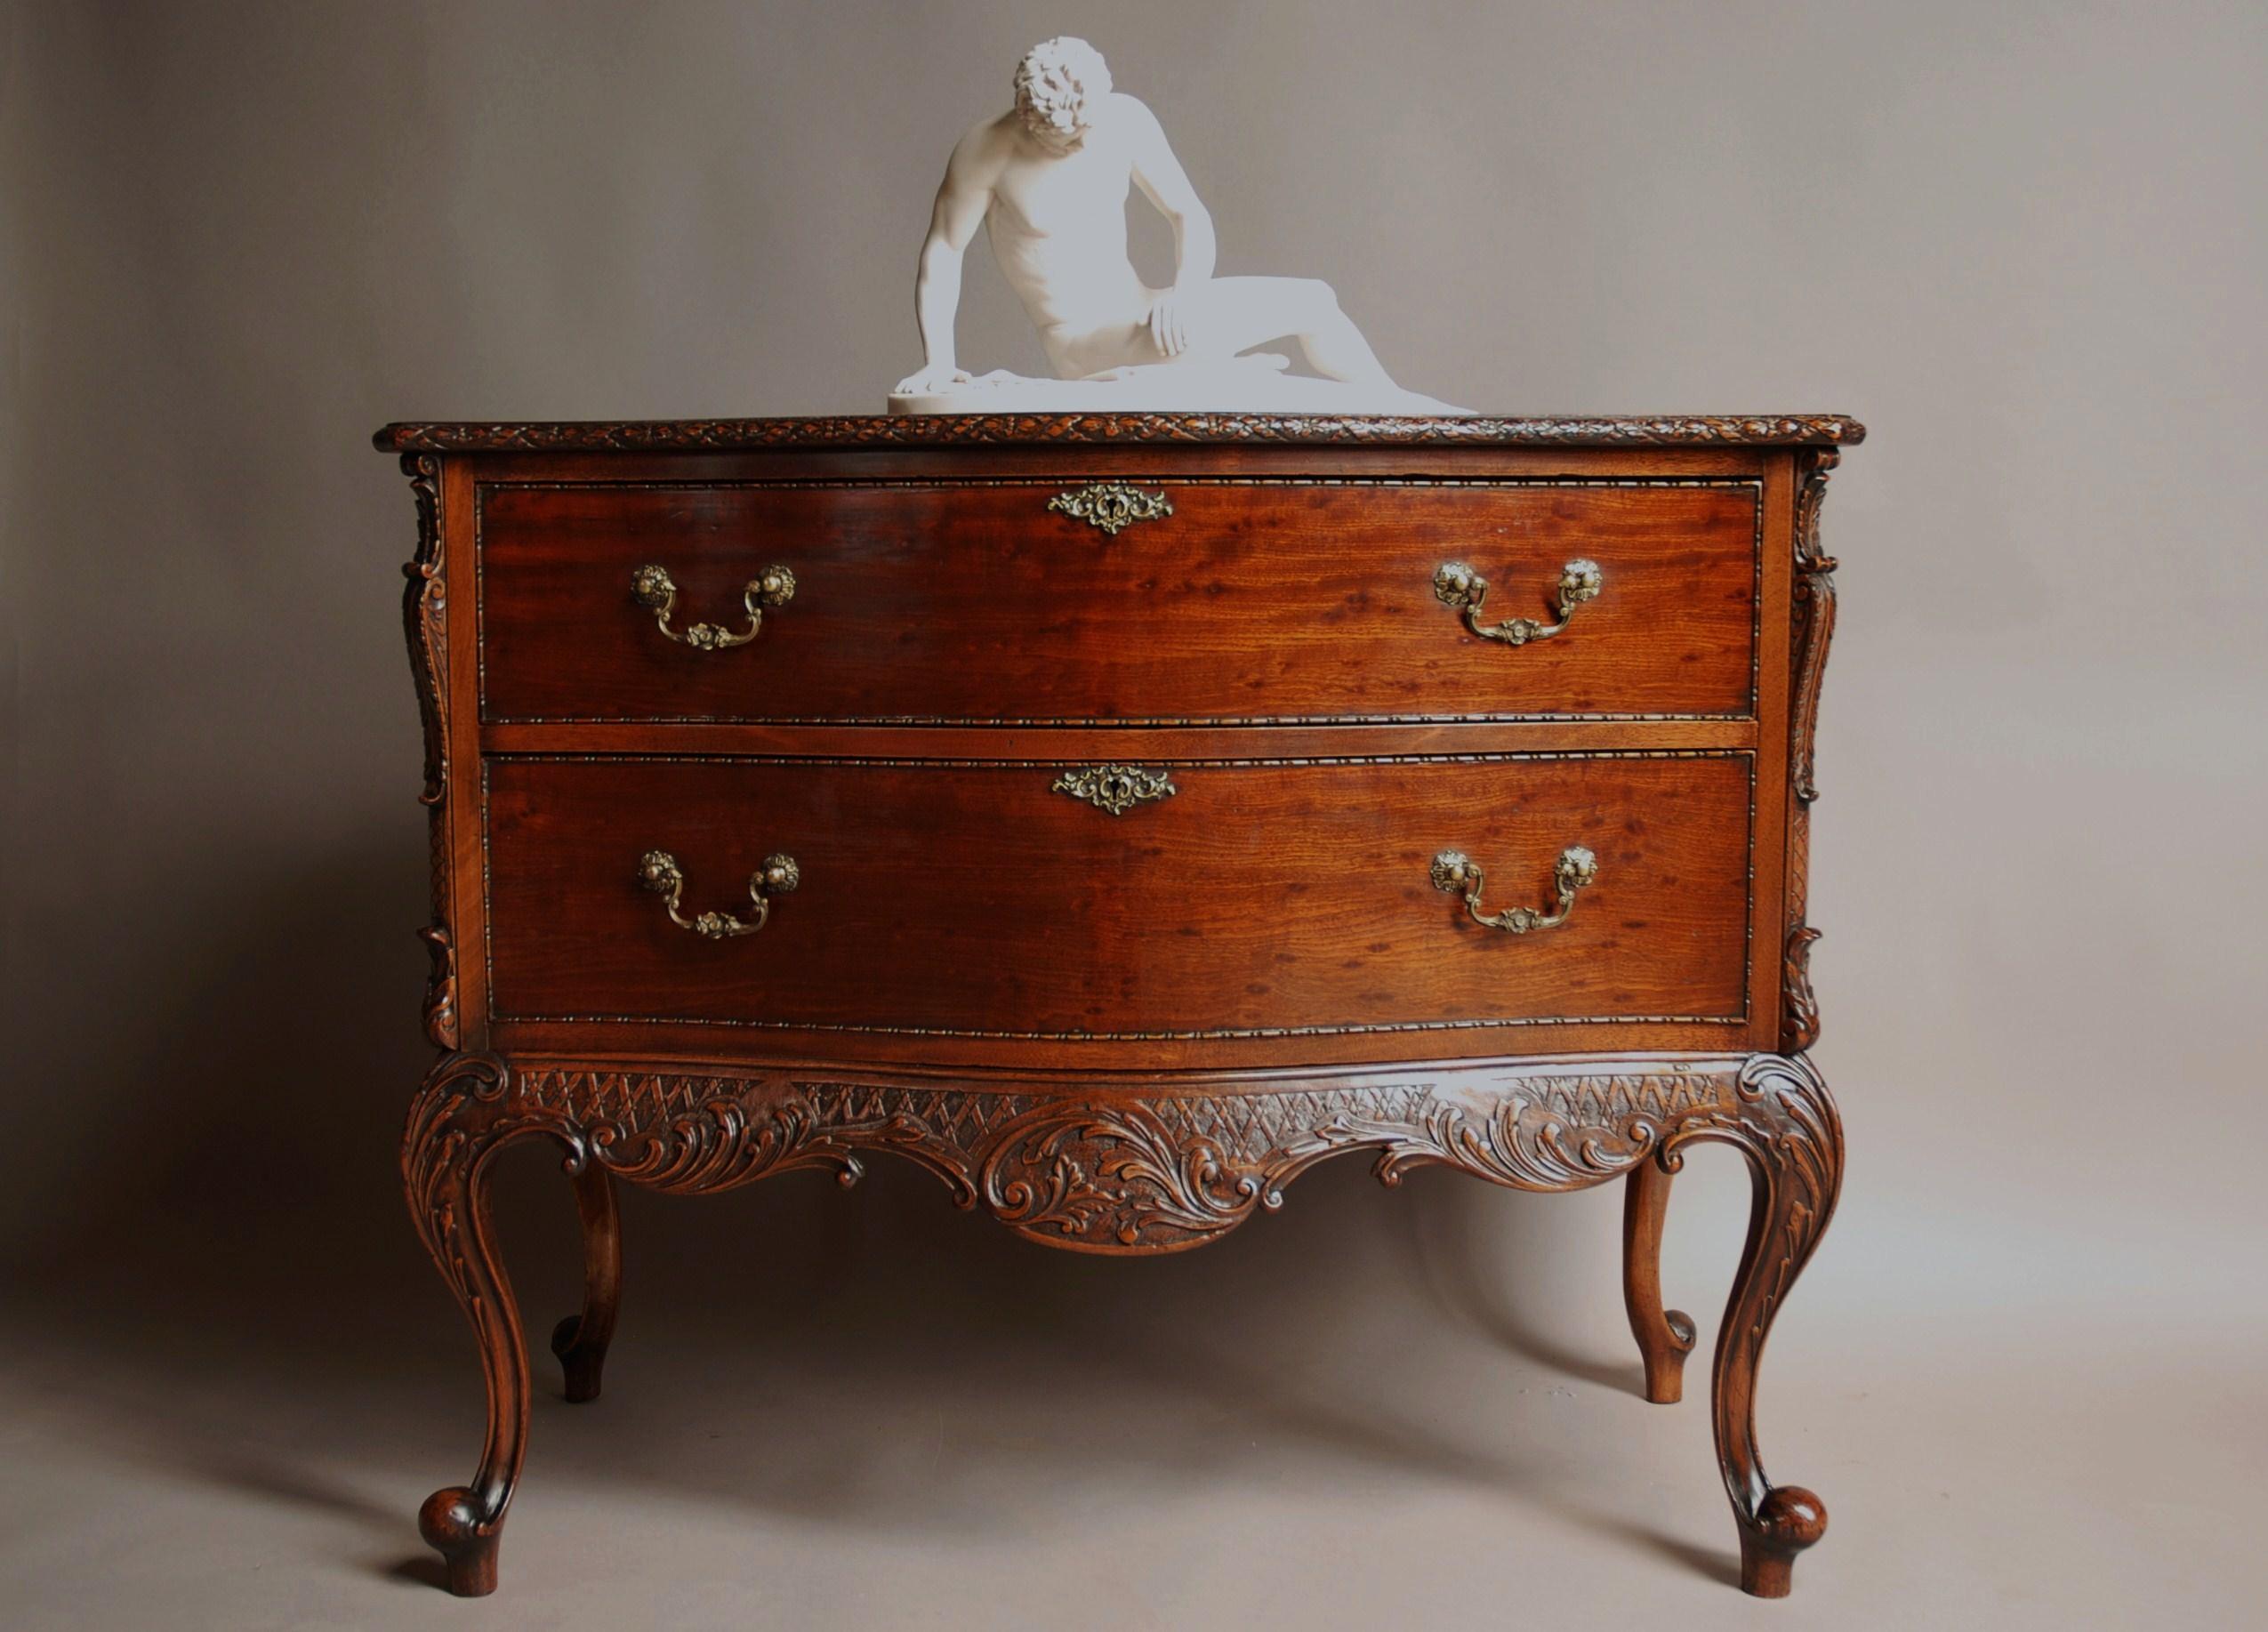 Fine quality Chippendale revival mahogany commode of serpentine form....